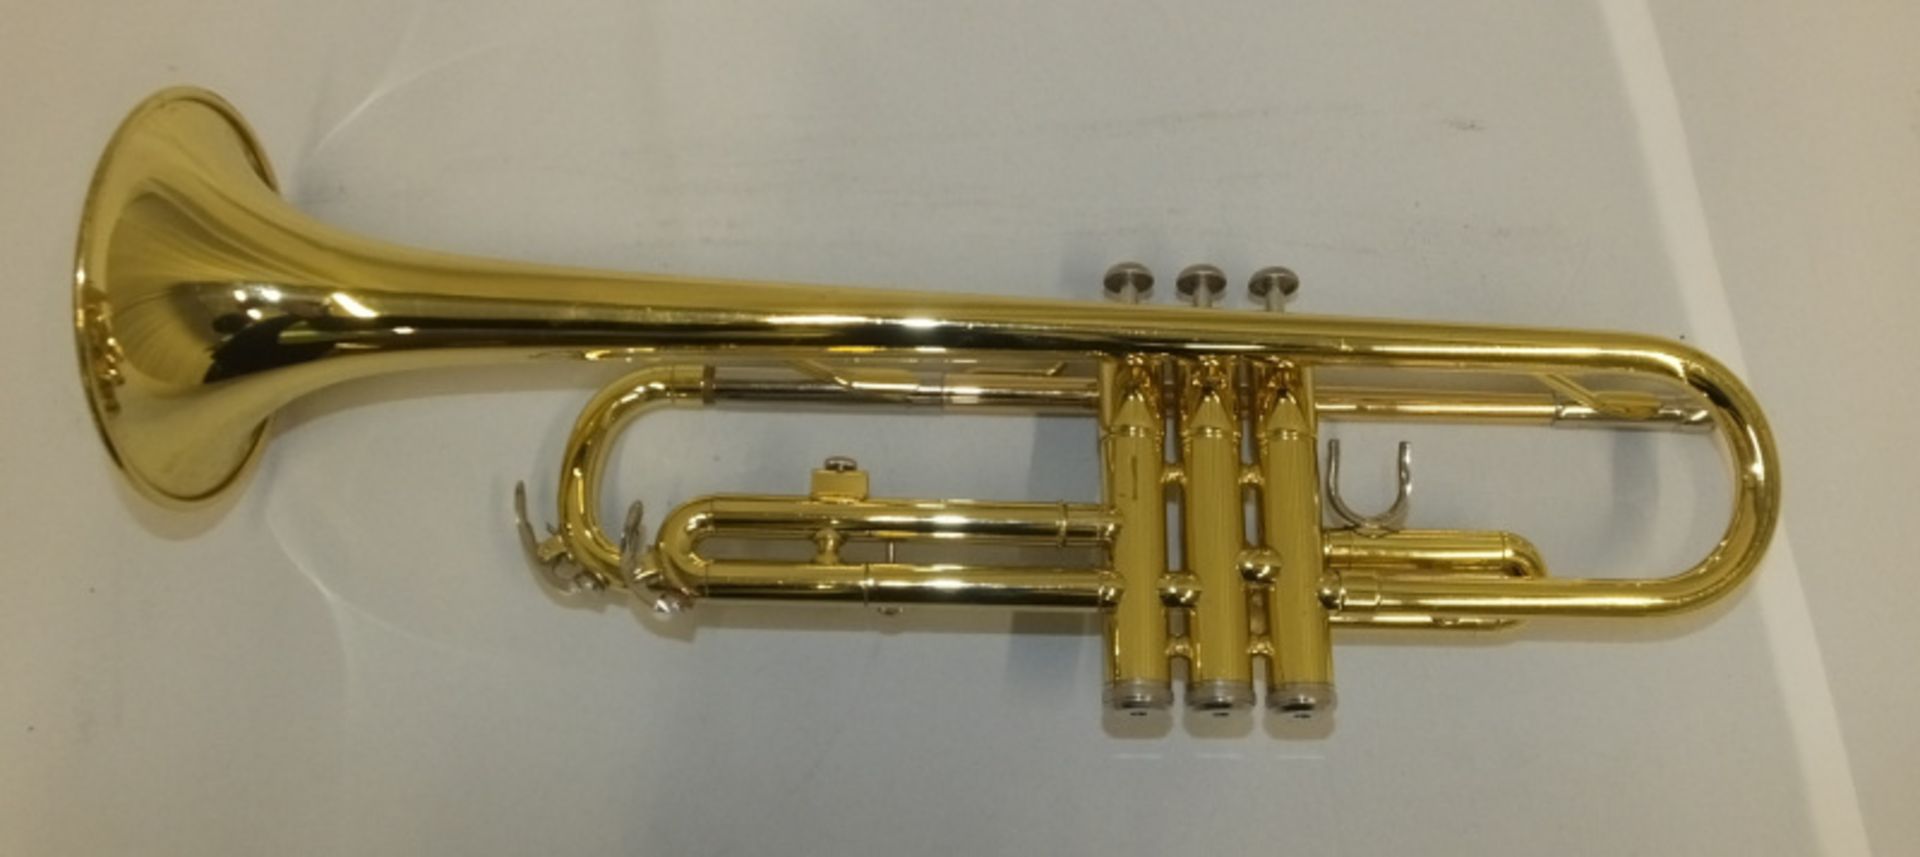 Yamaha YTR 2320E Trumpet in case - serial number 313785 - Please check photos carefully - Image 4 of 14